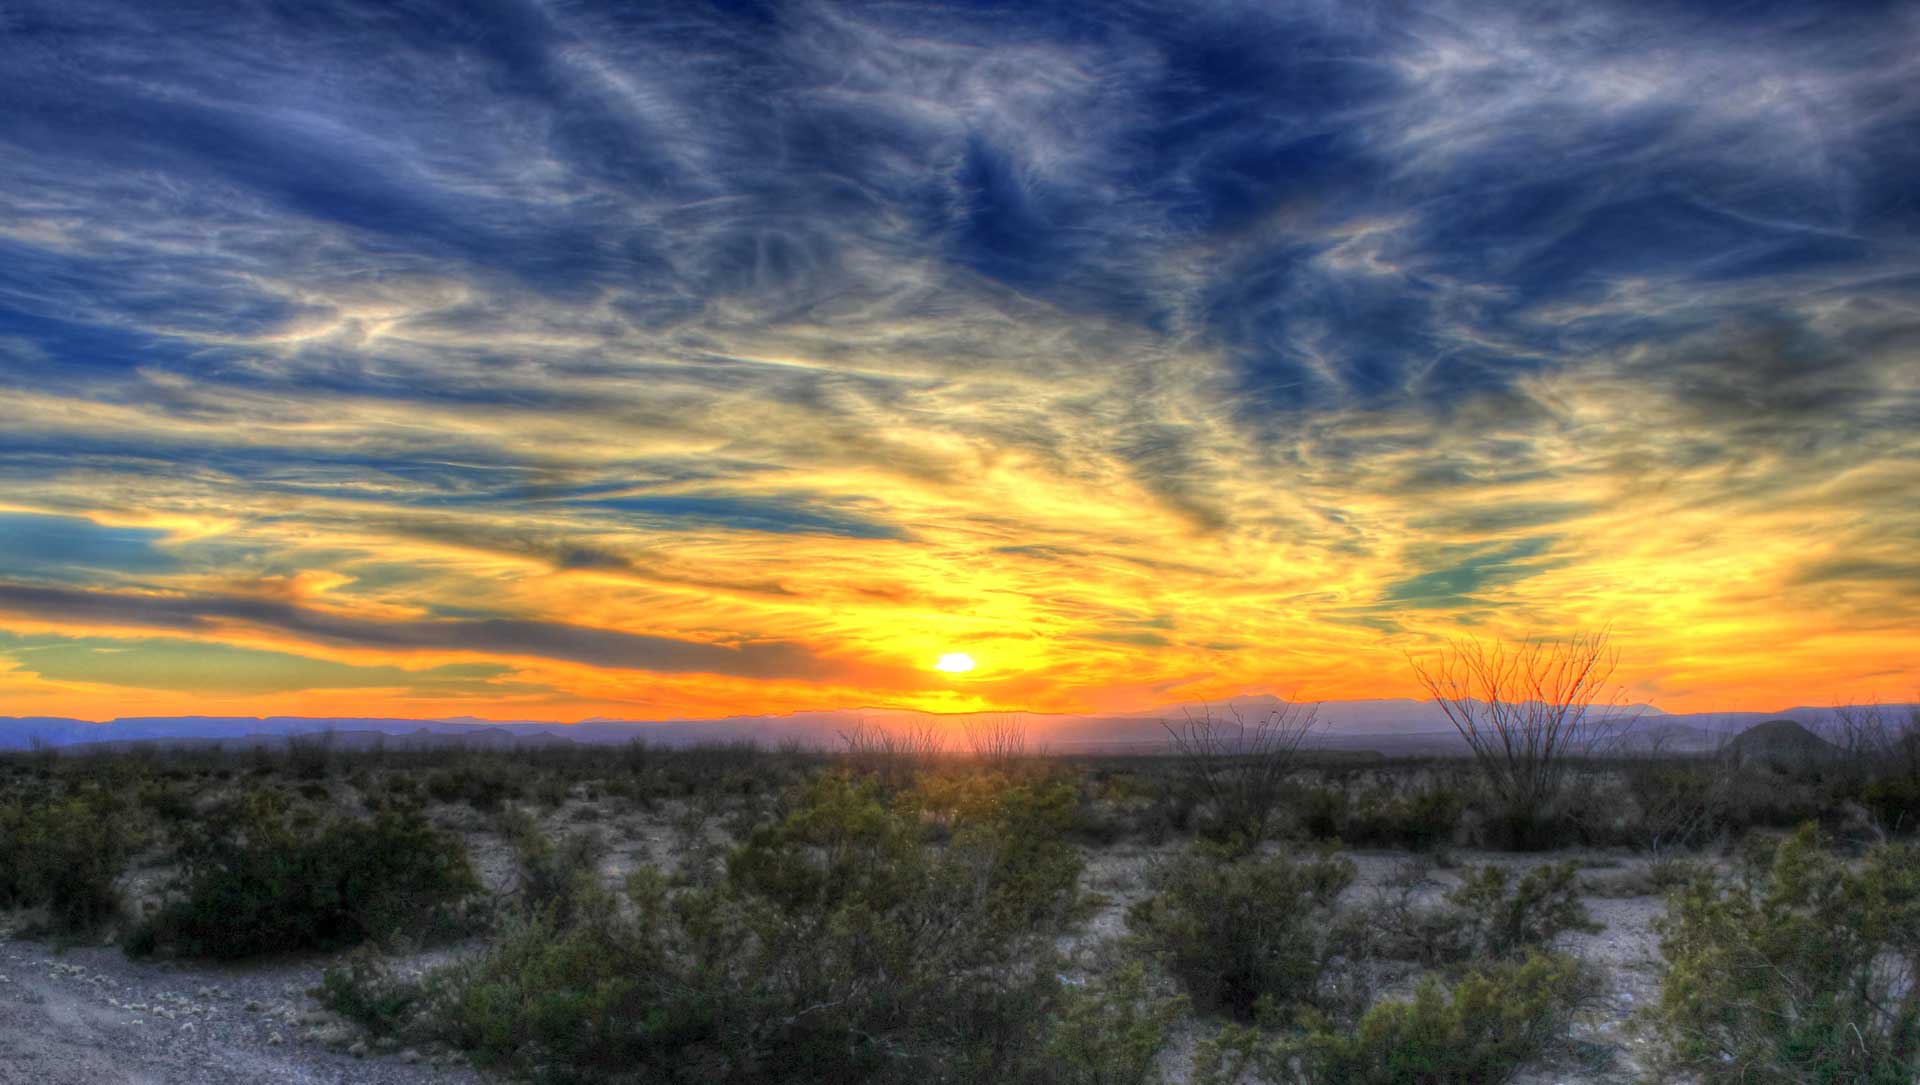 Beautiful sunset with wispy clouds and brilliant yellows and oranges with desert plants in the foreground, including ocatillo and scrub brush